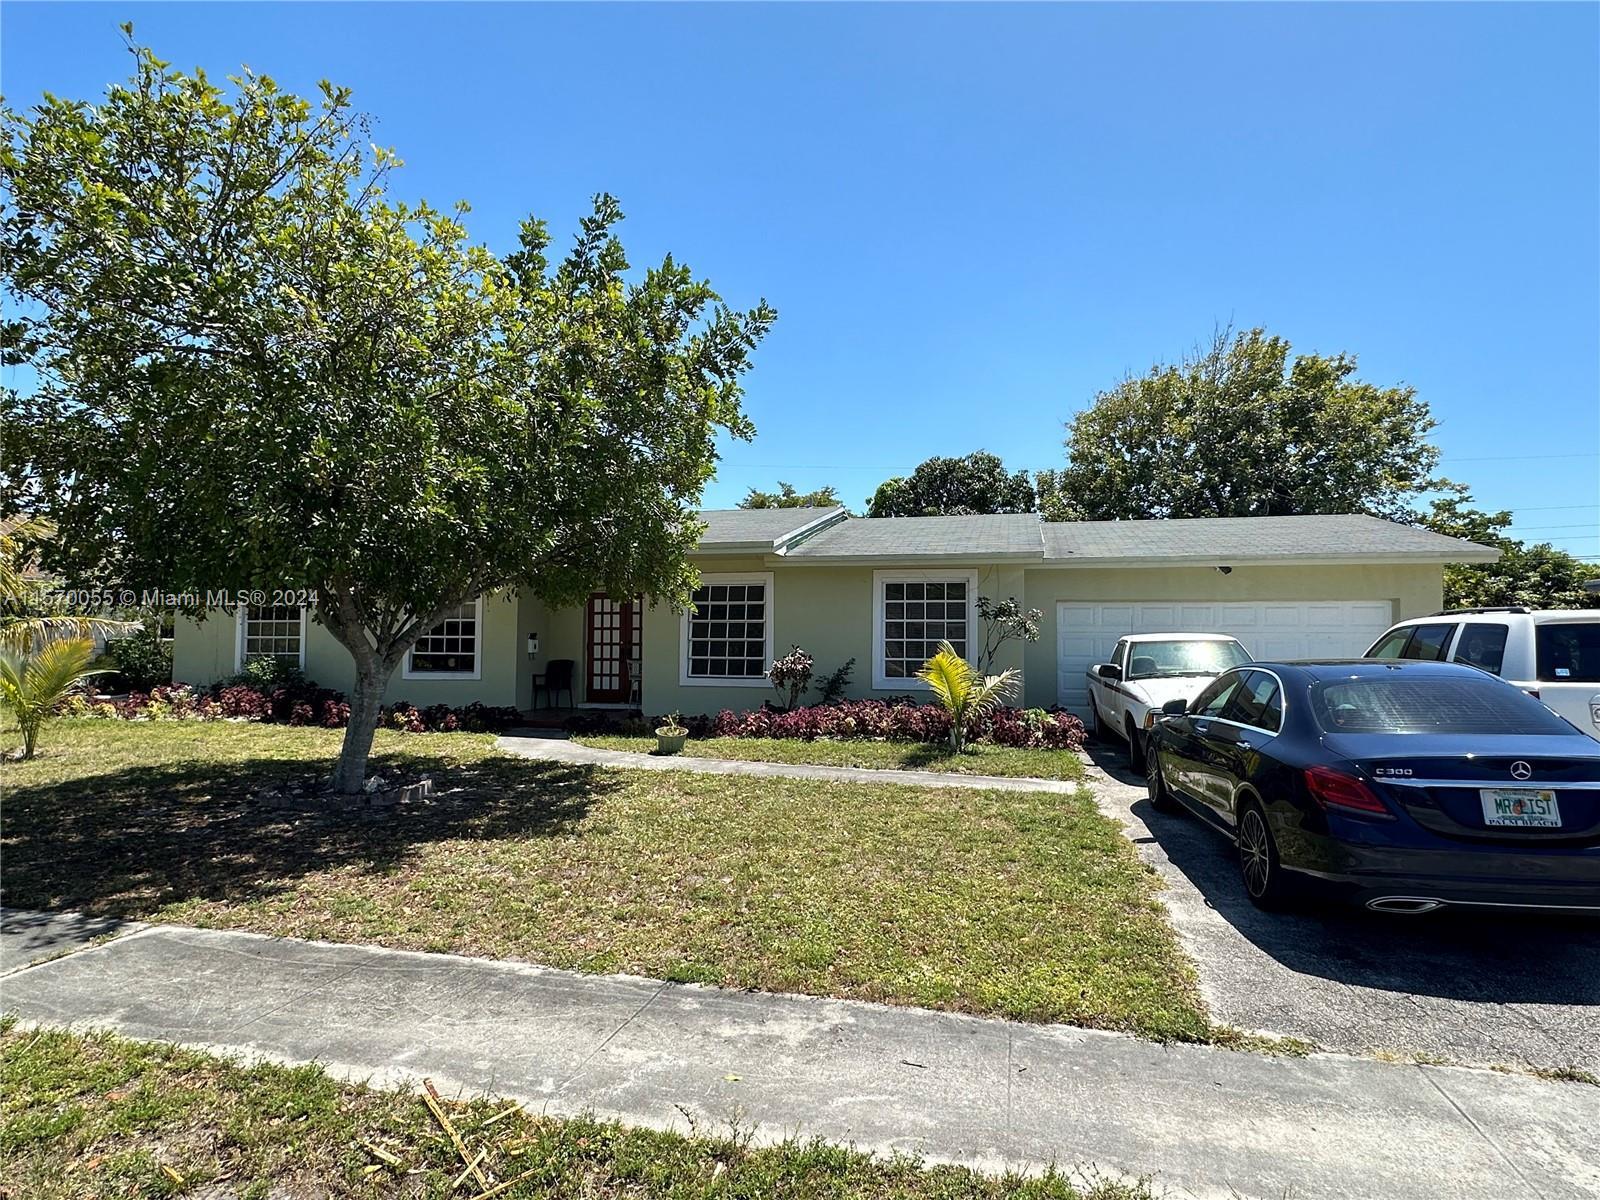 Photo of 4330 NW 7th Ct in Plantation, FL